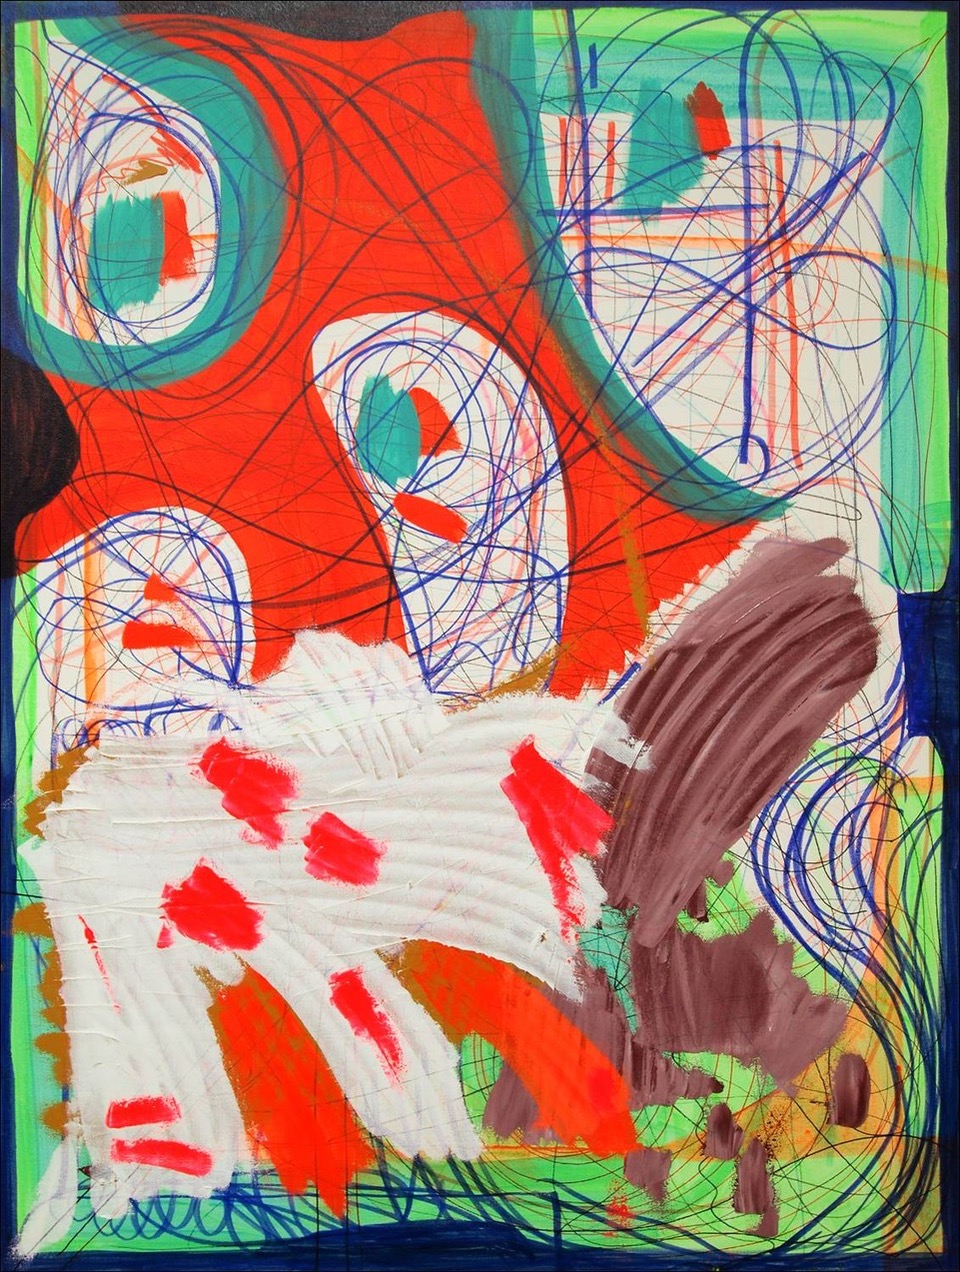 Joanne Greenbaum
Untitled, 2017
Oil, acrylic and markers on canvas
101,6 x 76,2 cm